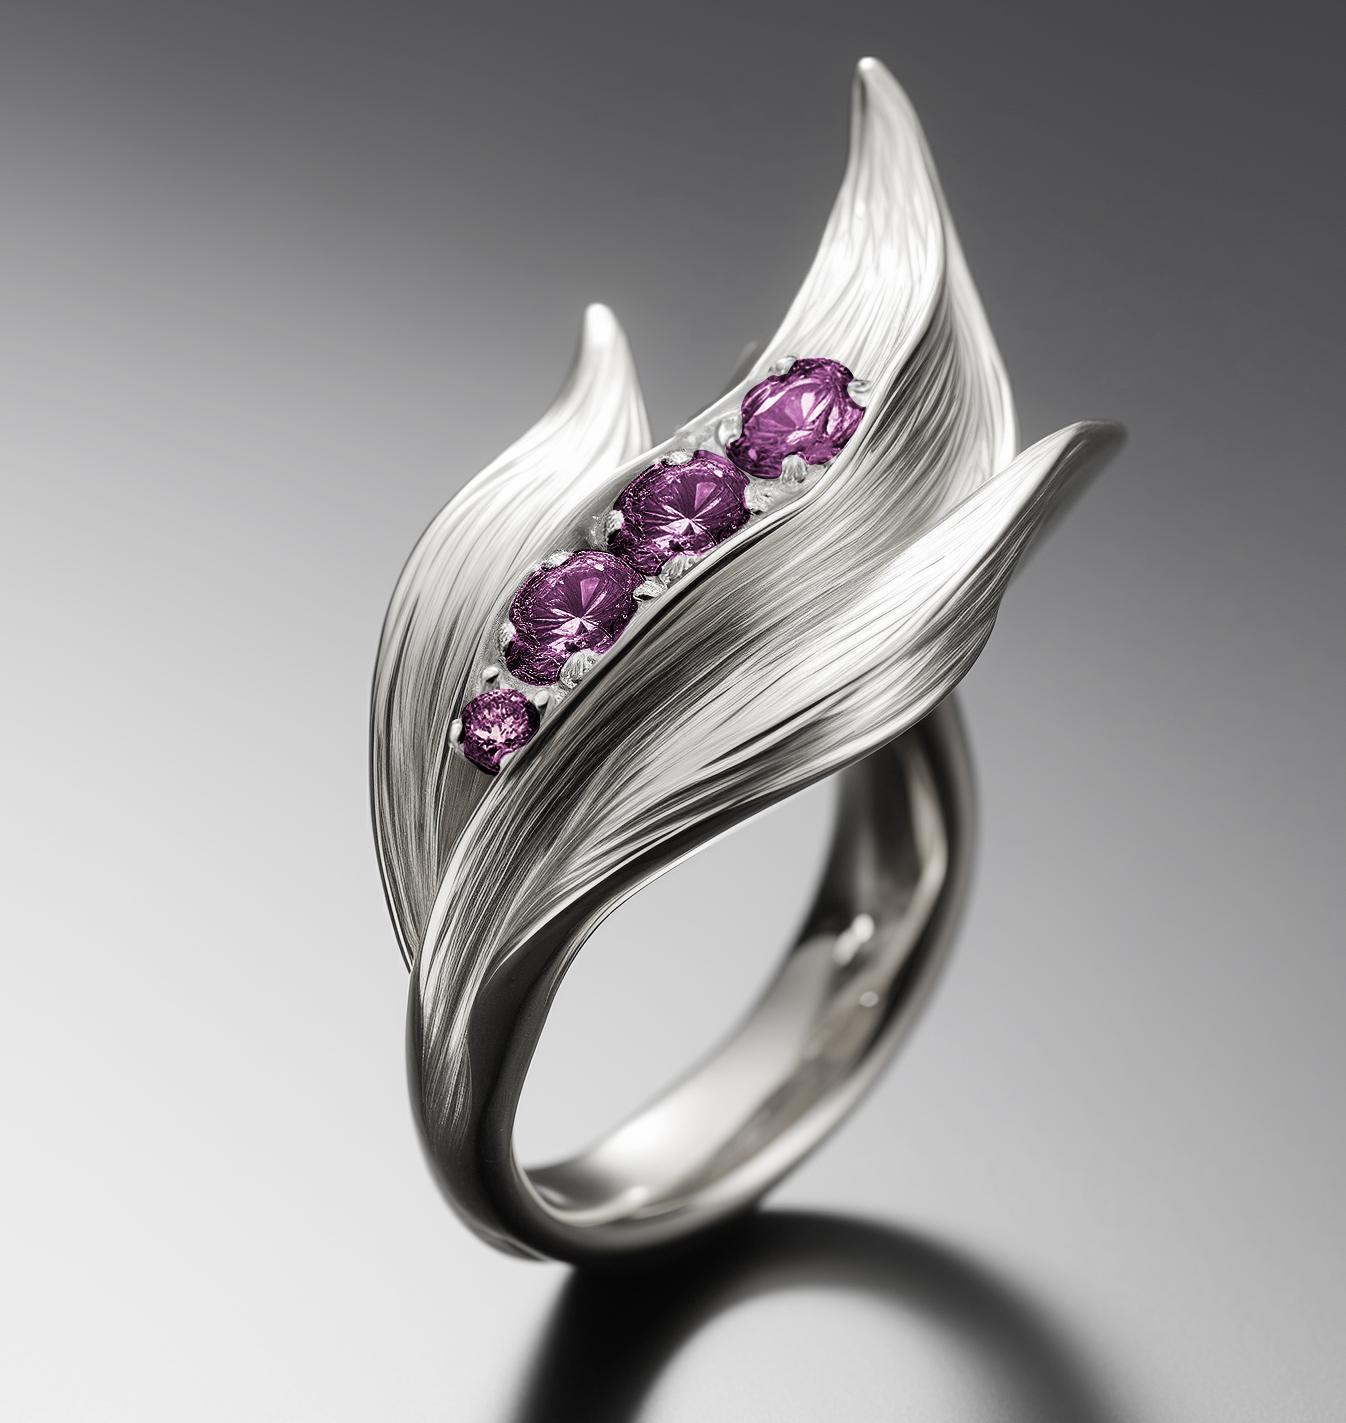 Taille ronde The Contemporary Lily of The Valley Ring with Purple Sapphires (bague muguet contemporaine en or blanc avec saphirs violets) en vente